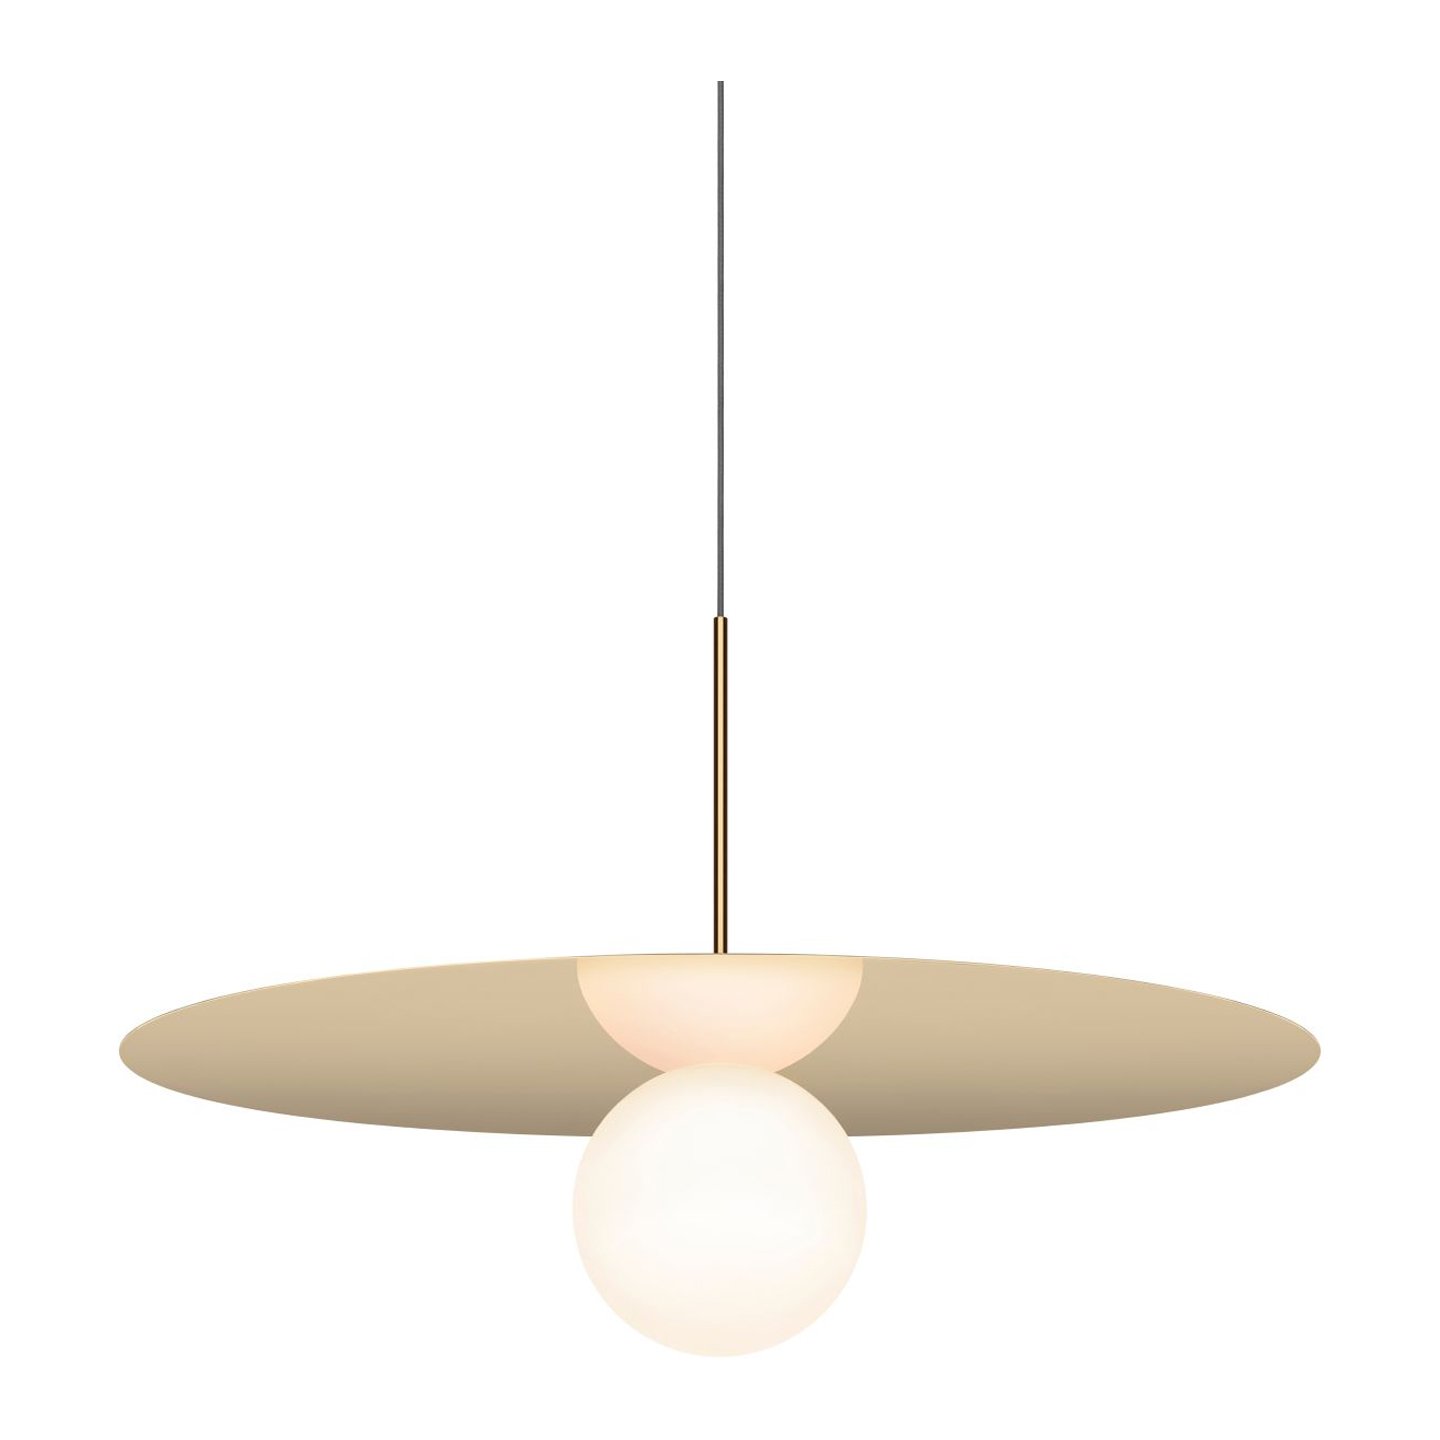 Haworth Bola DIsc Lighting with metal disc above light bulb with wire coming down